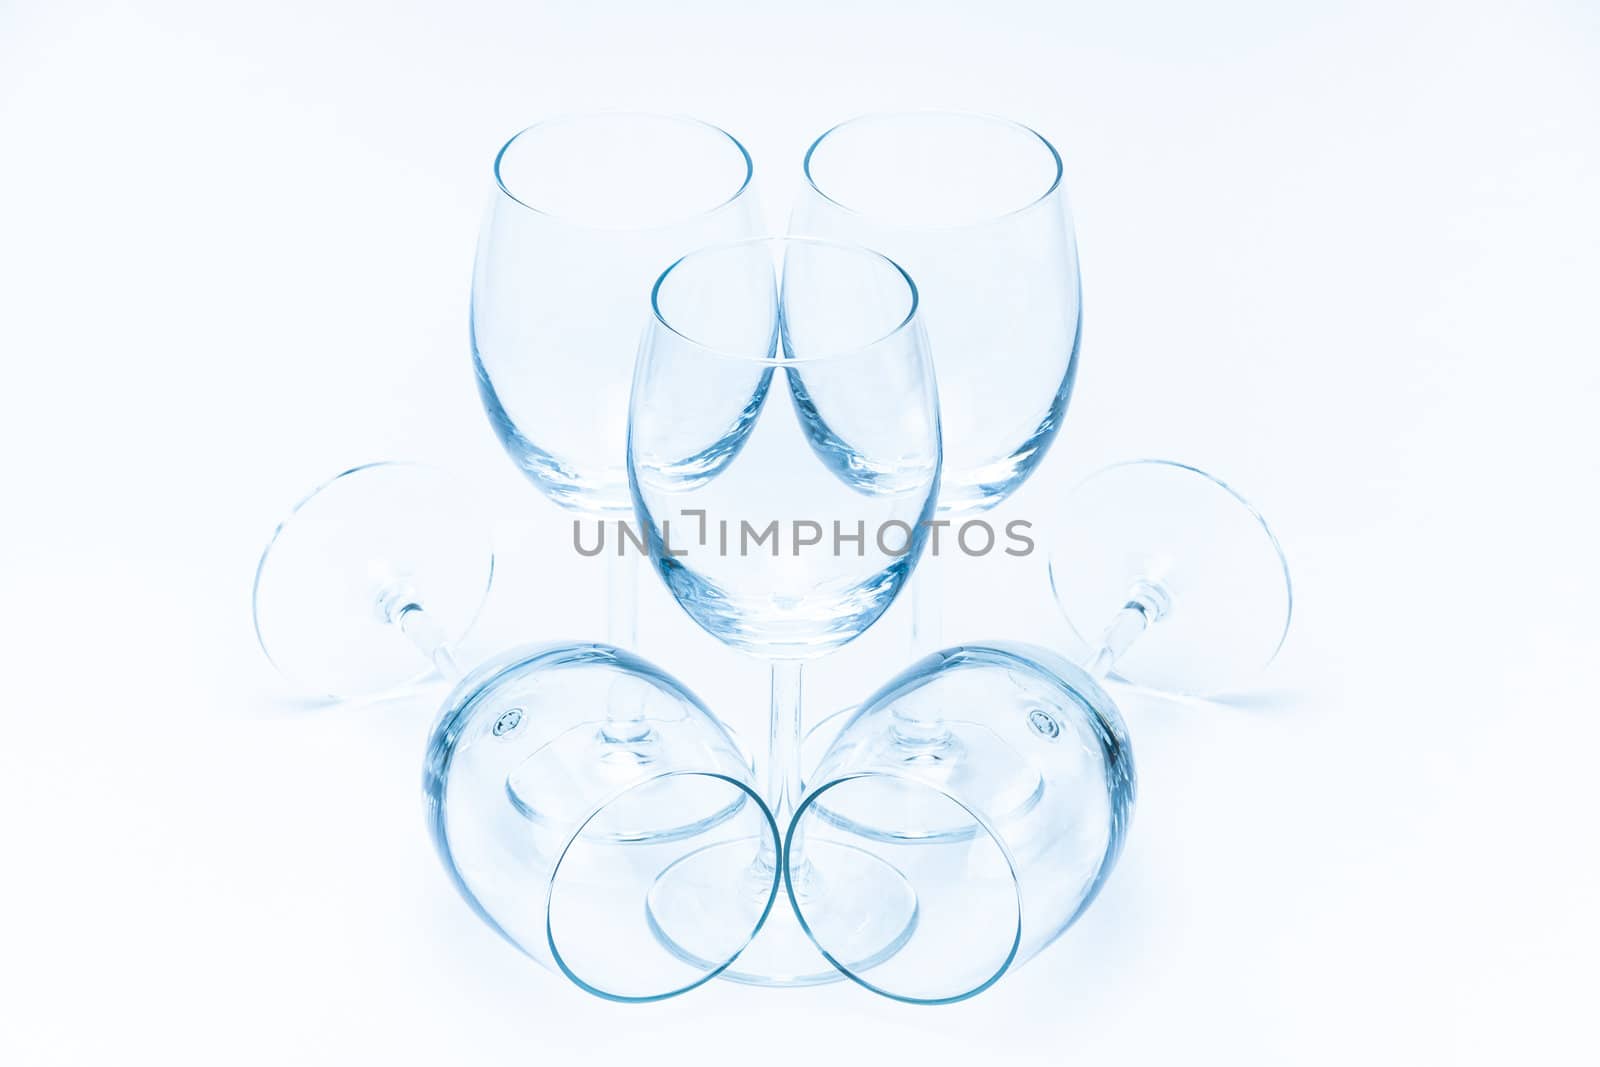 Empty wine glasses stand symmetrically on a white background